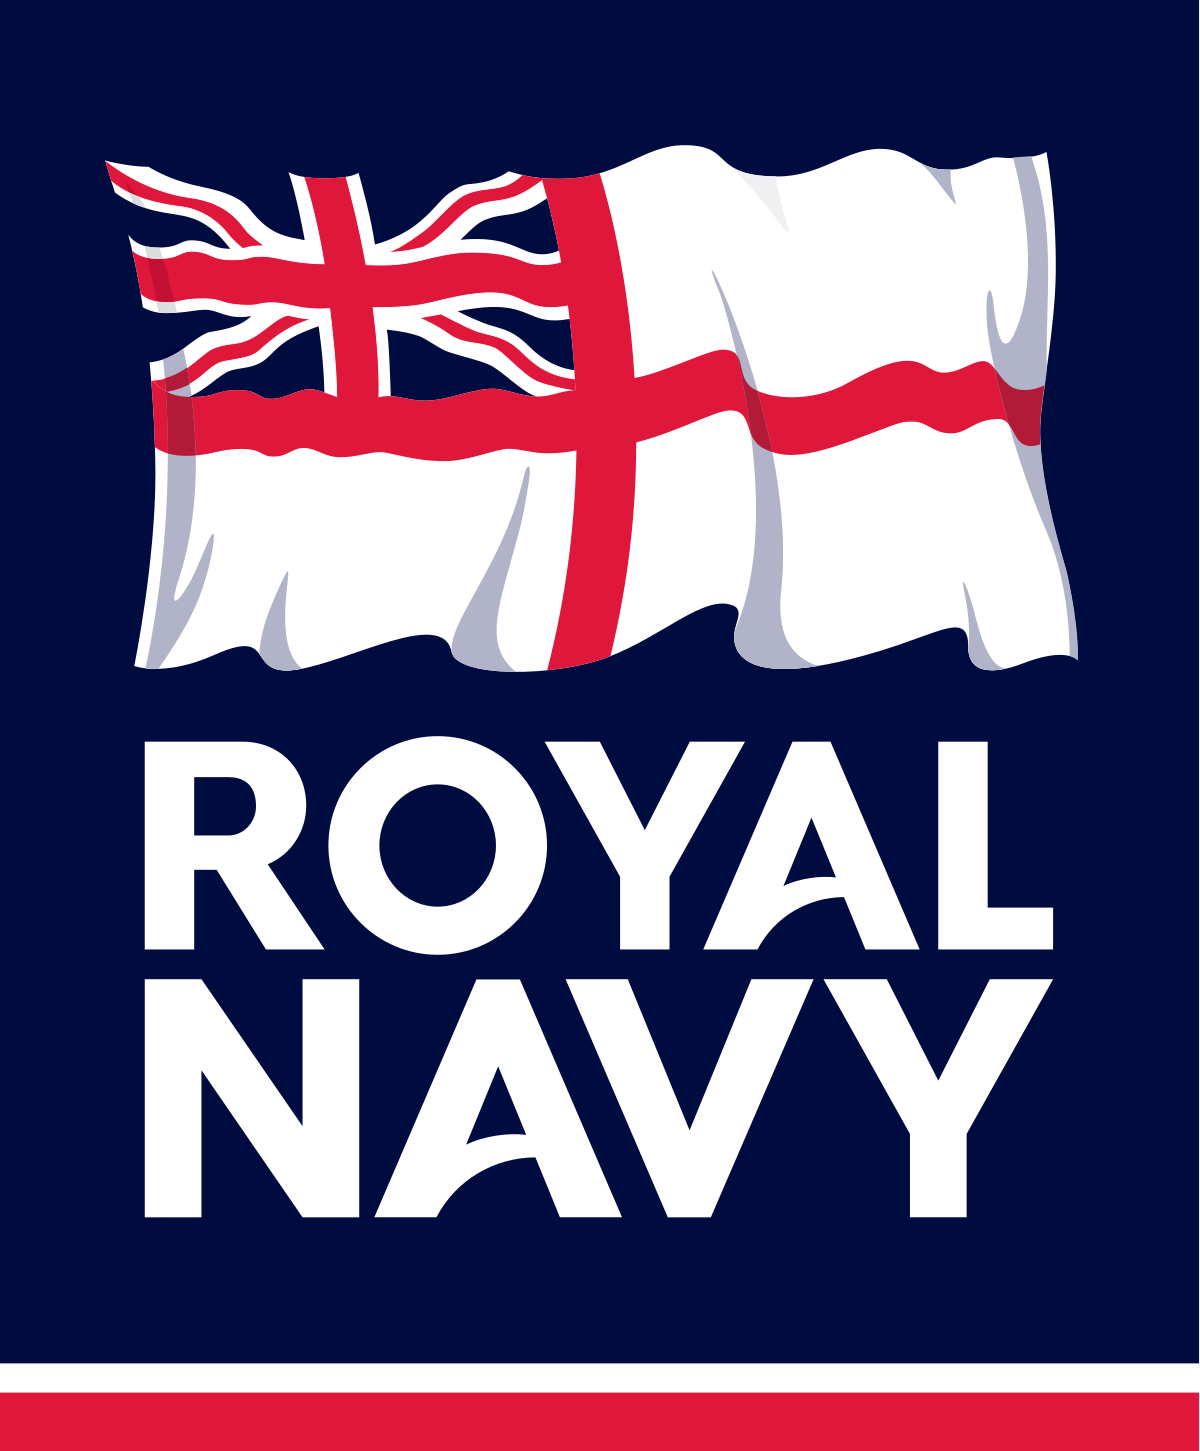 MoD Navy Contract To Create 2,000 New Graduate Jobs & Apprenticeships In The UK